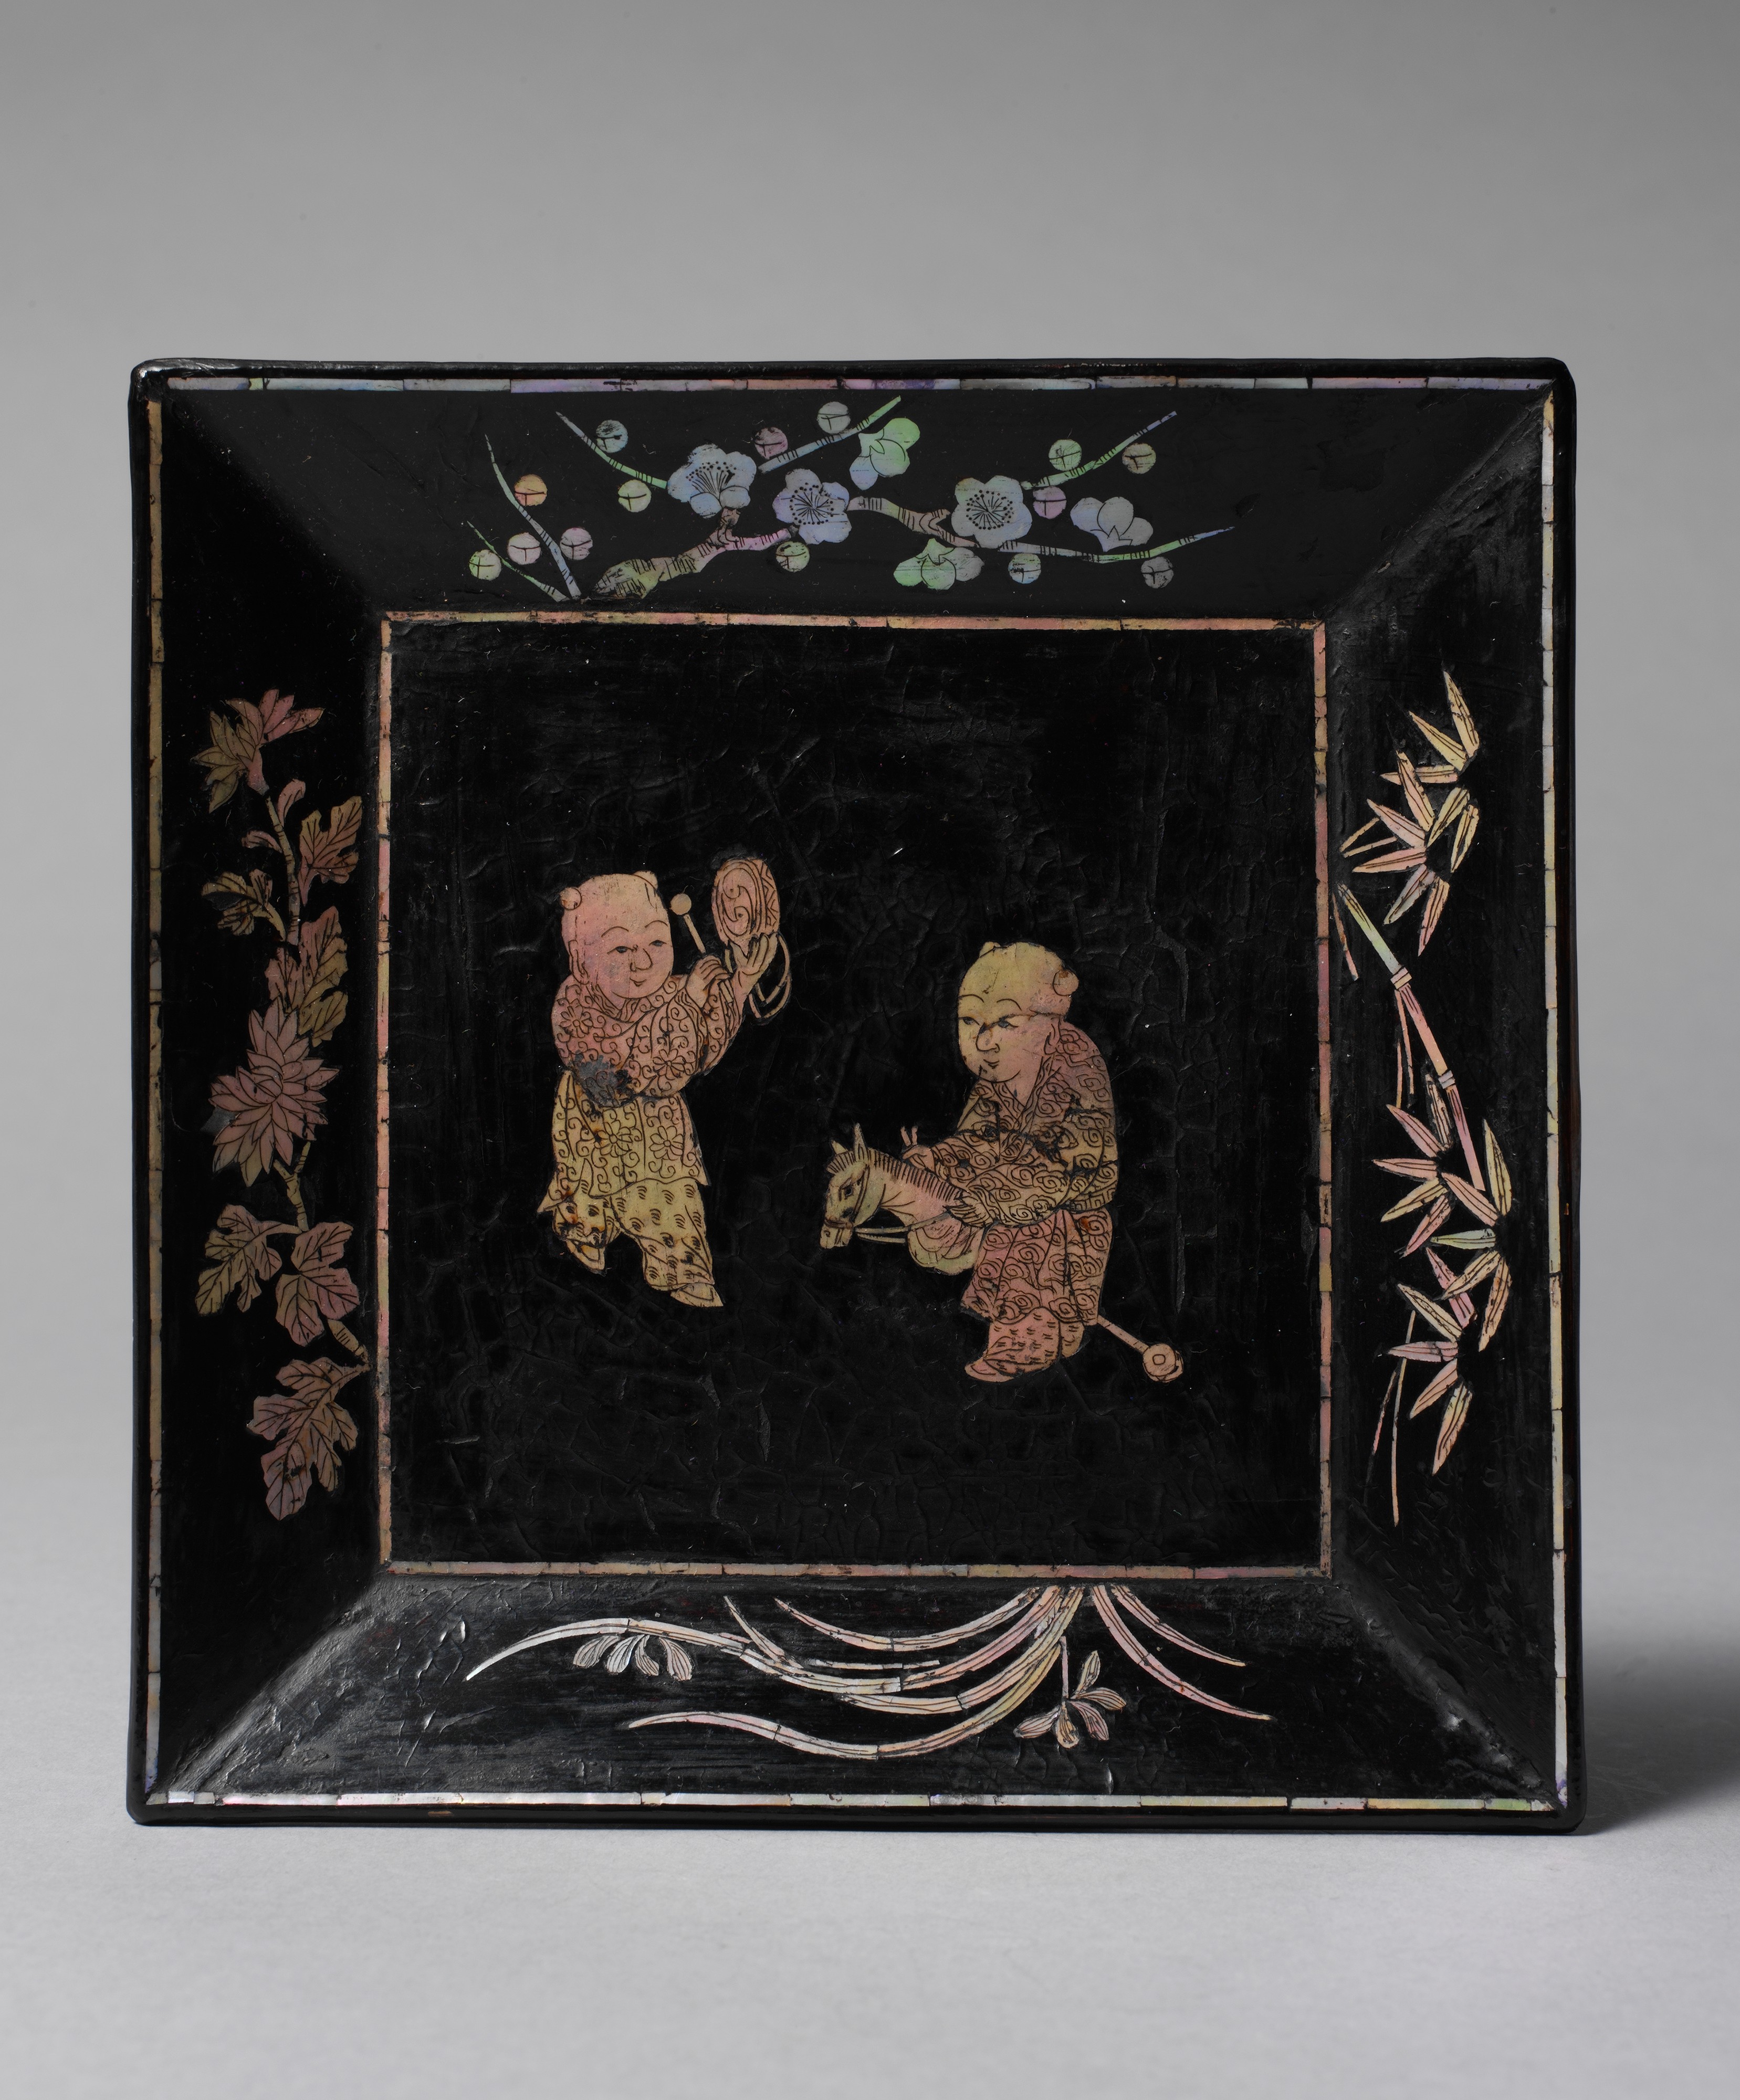 Dish with two boys by Unknown Artist - 16th century - 1.9 x 14.3 x 14.3 cm Metropolitan Museum of Art